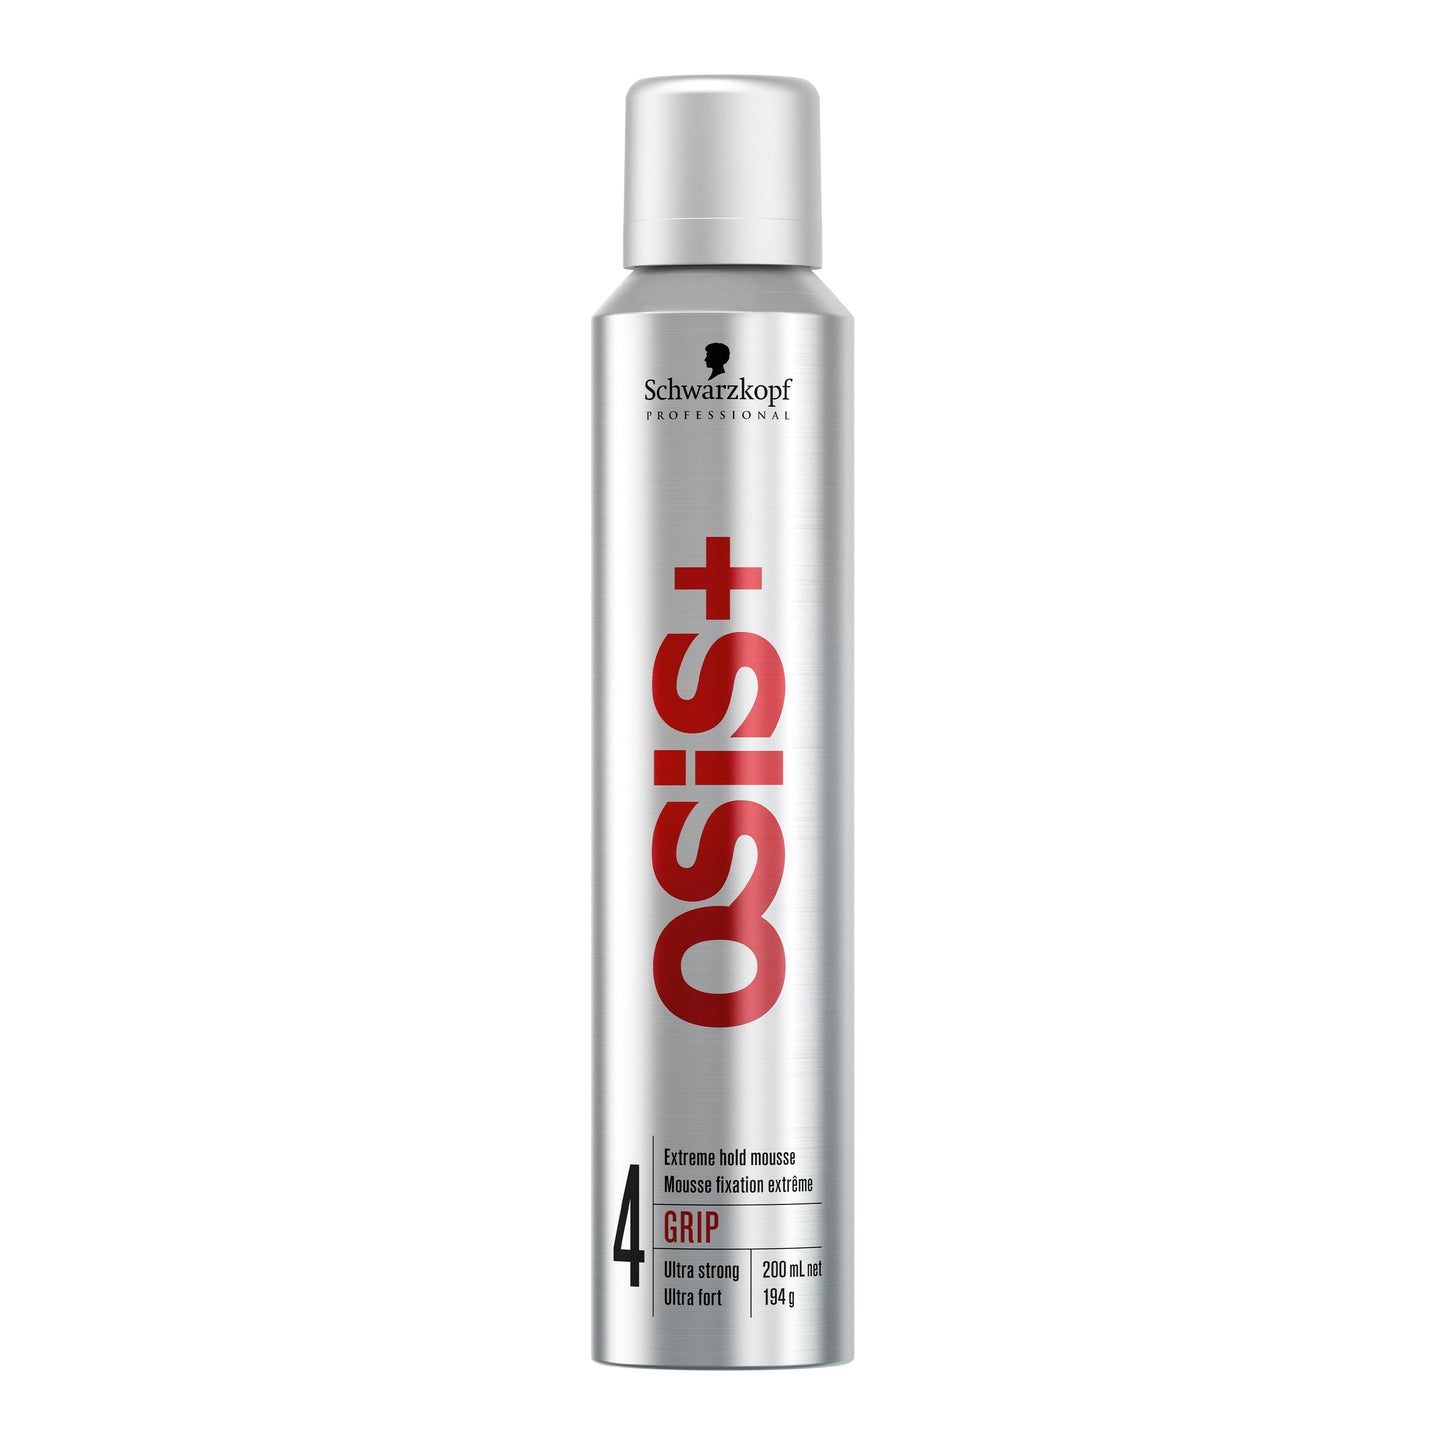 Schwarzkopf OSiS+ GRIP Extreme Hold Mousse